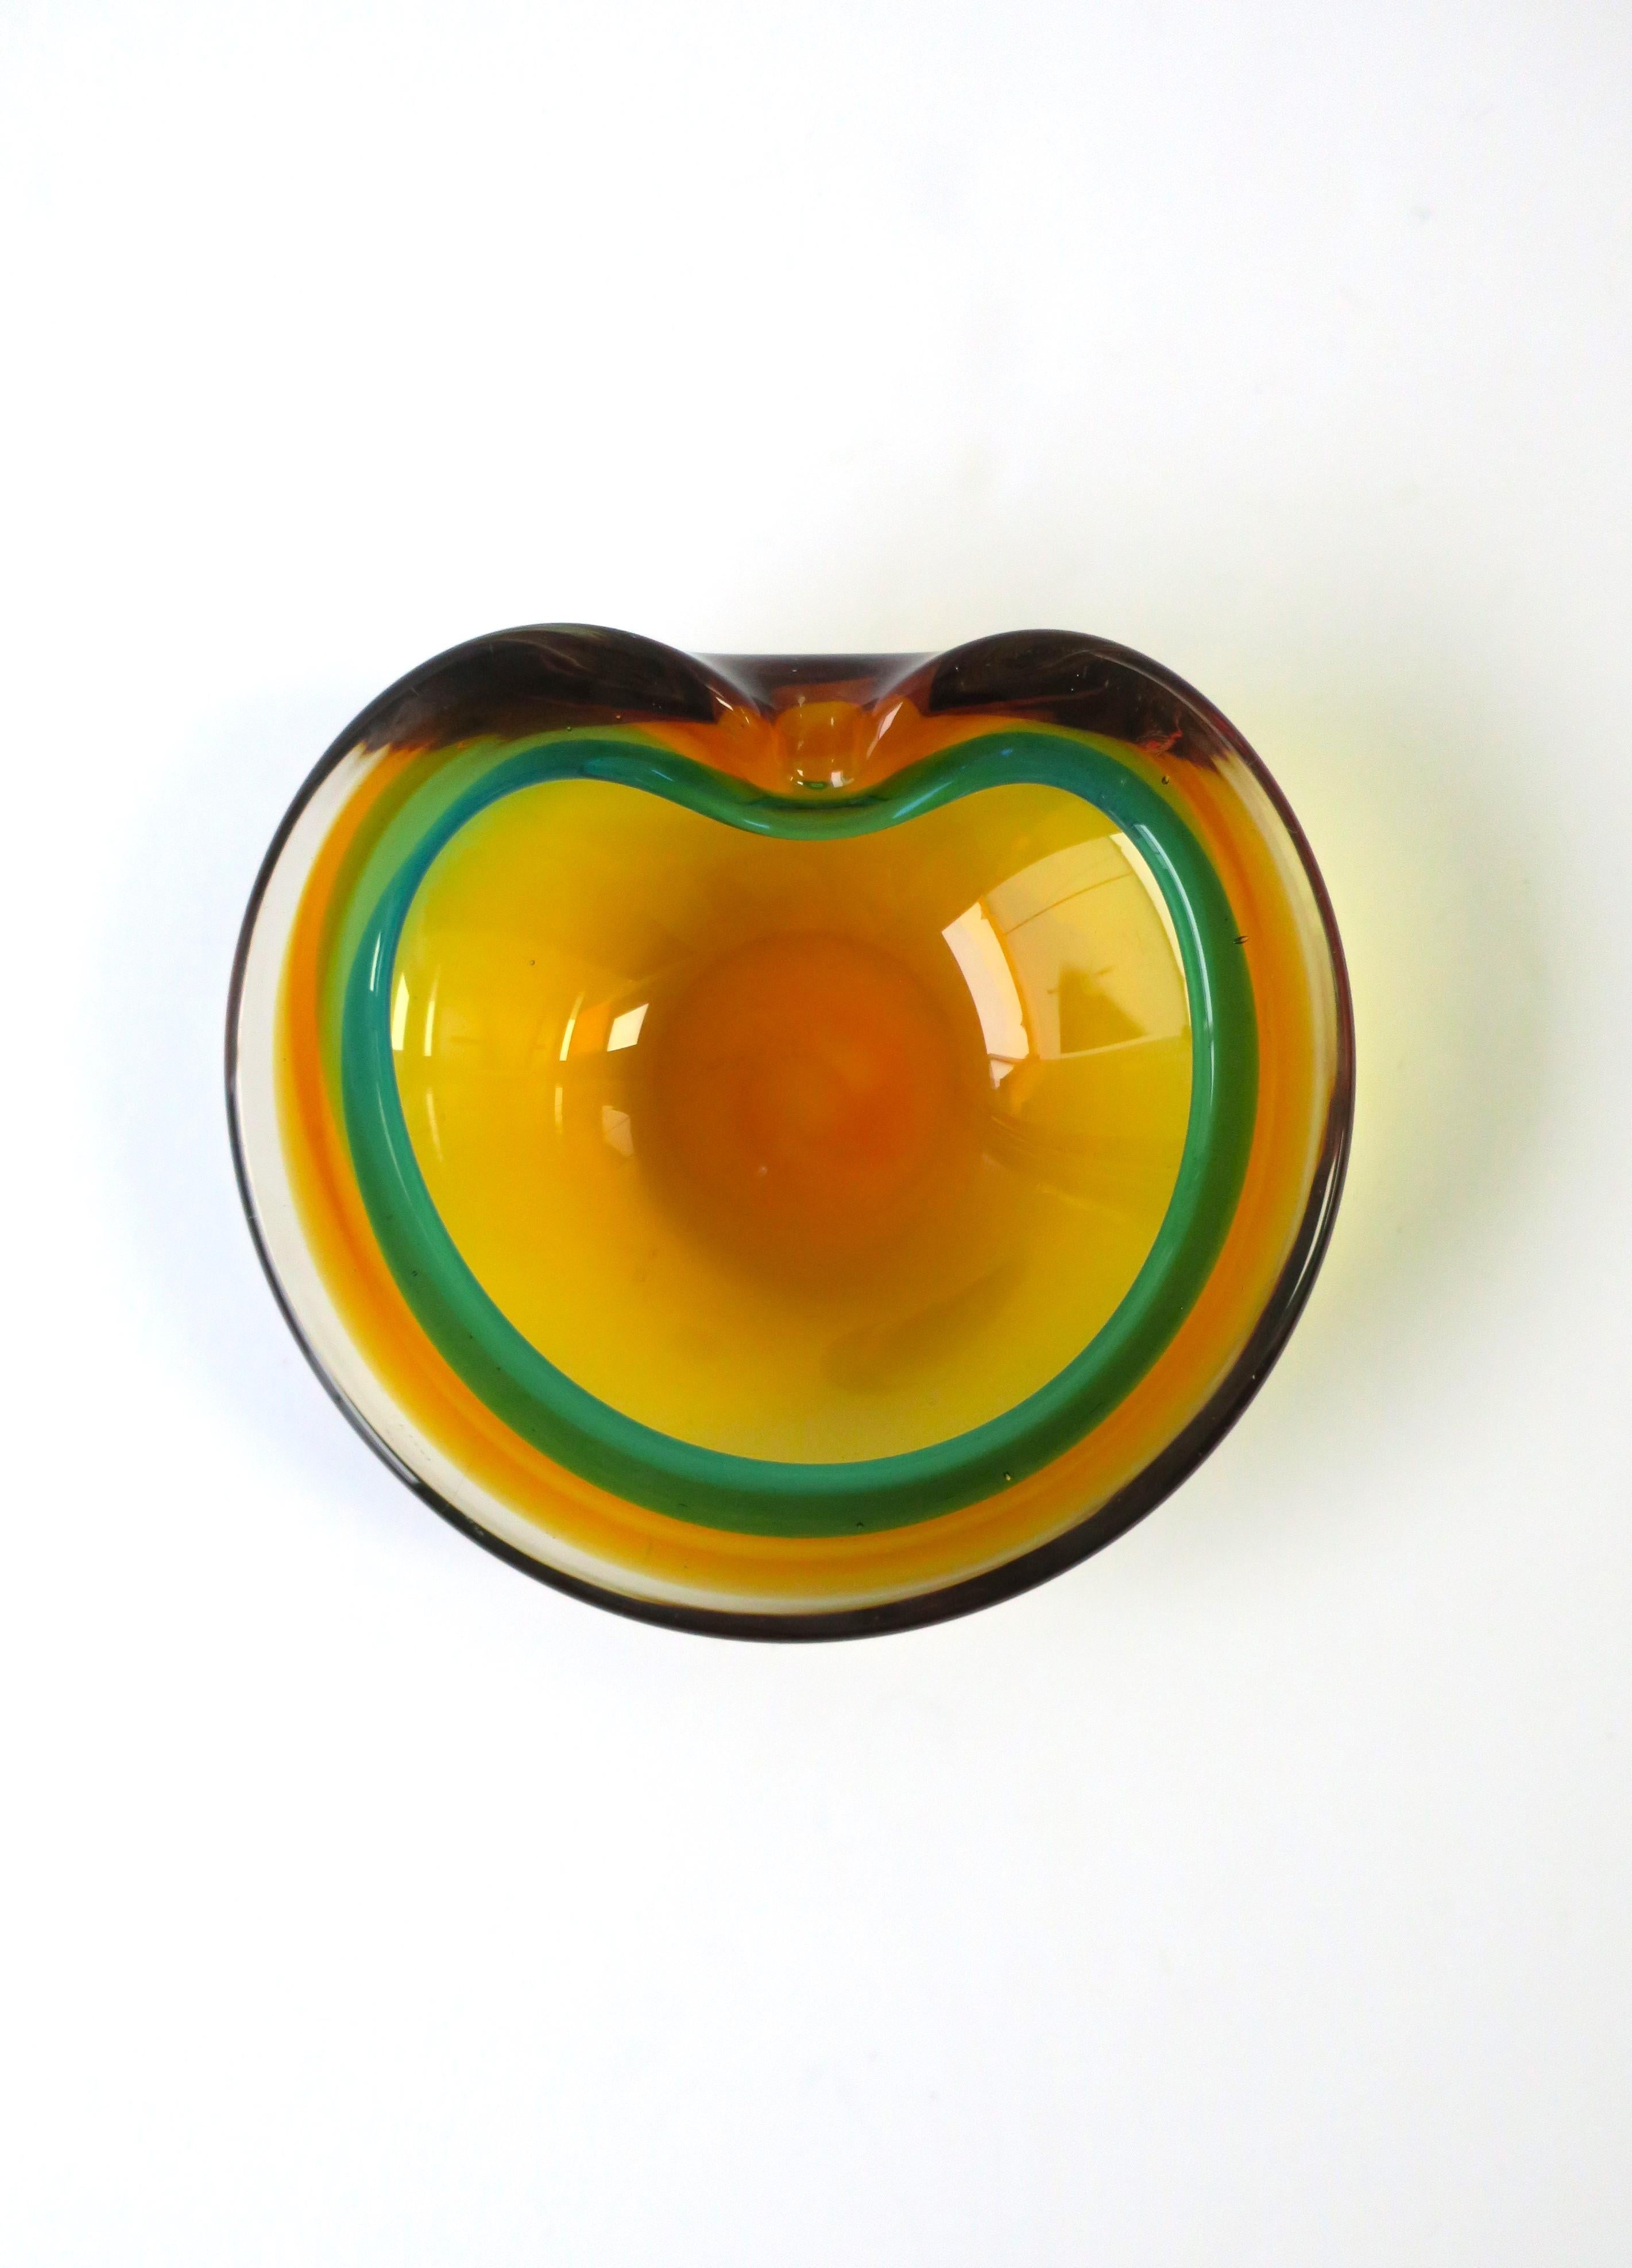 A substantial Italian Murano 'Sommerso' bowl in saffron yellow and Kelly-green art glass attributed to the Seguso atelier, circa mid-20th century, 1960s, Italy. Bowl can also double as an ashtray, with dip/indent allowing room for a cigarette,